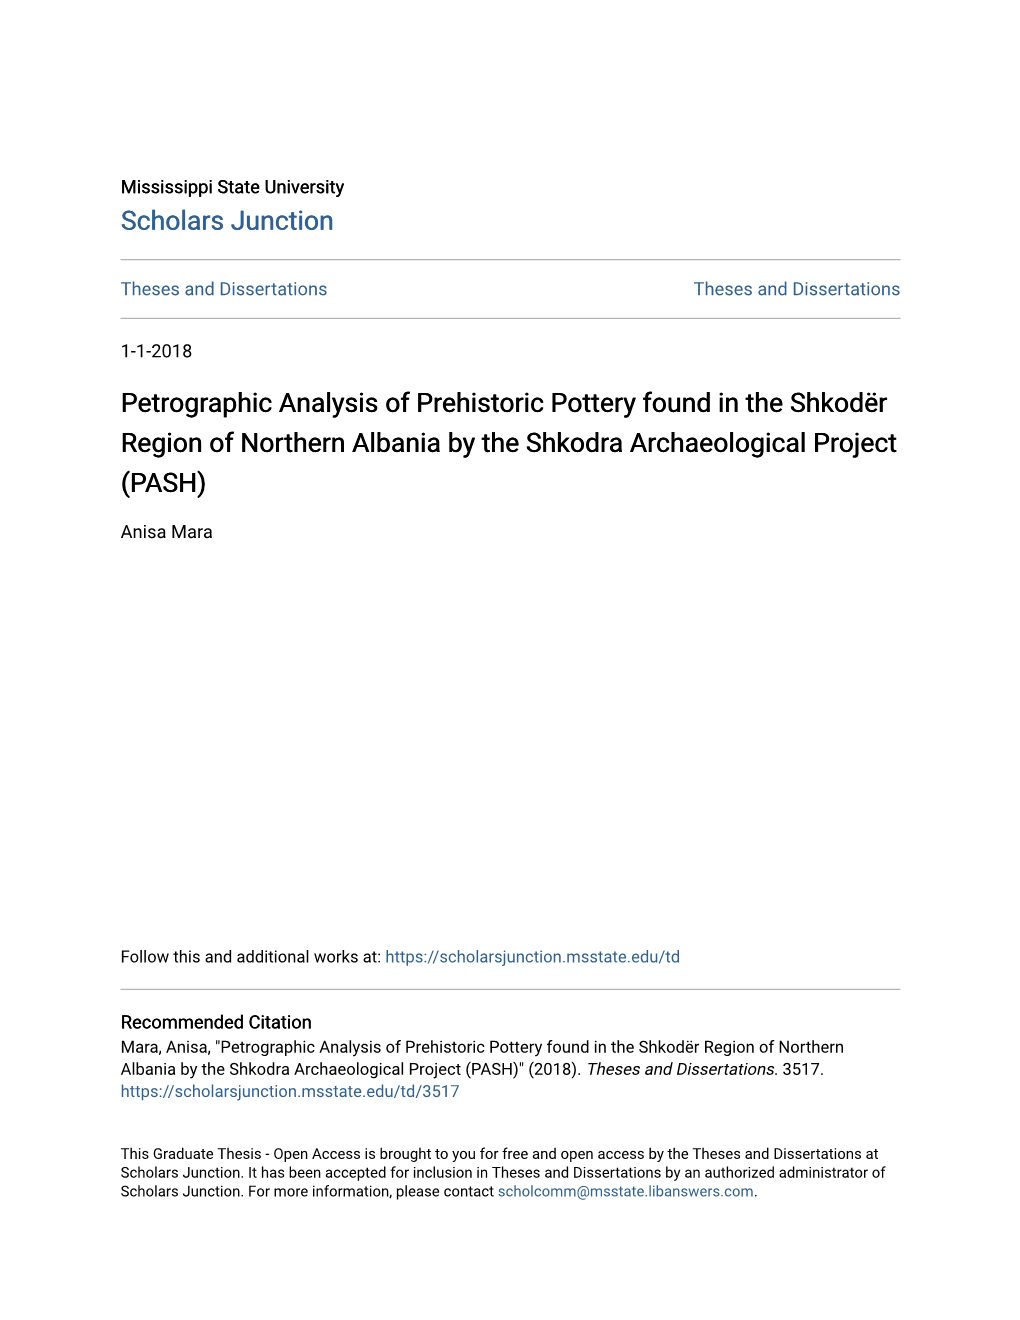 Petrographic Analysis of Prehistoric Pottery Found in the Shkodër Region of Northern Albania by the Shkodra Archaeological Project (PASH)